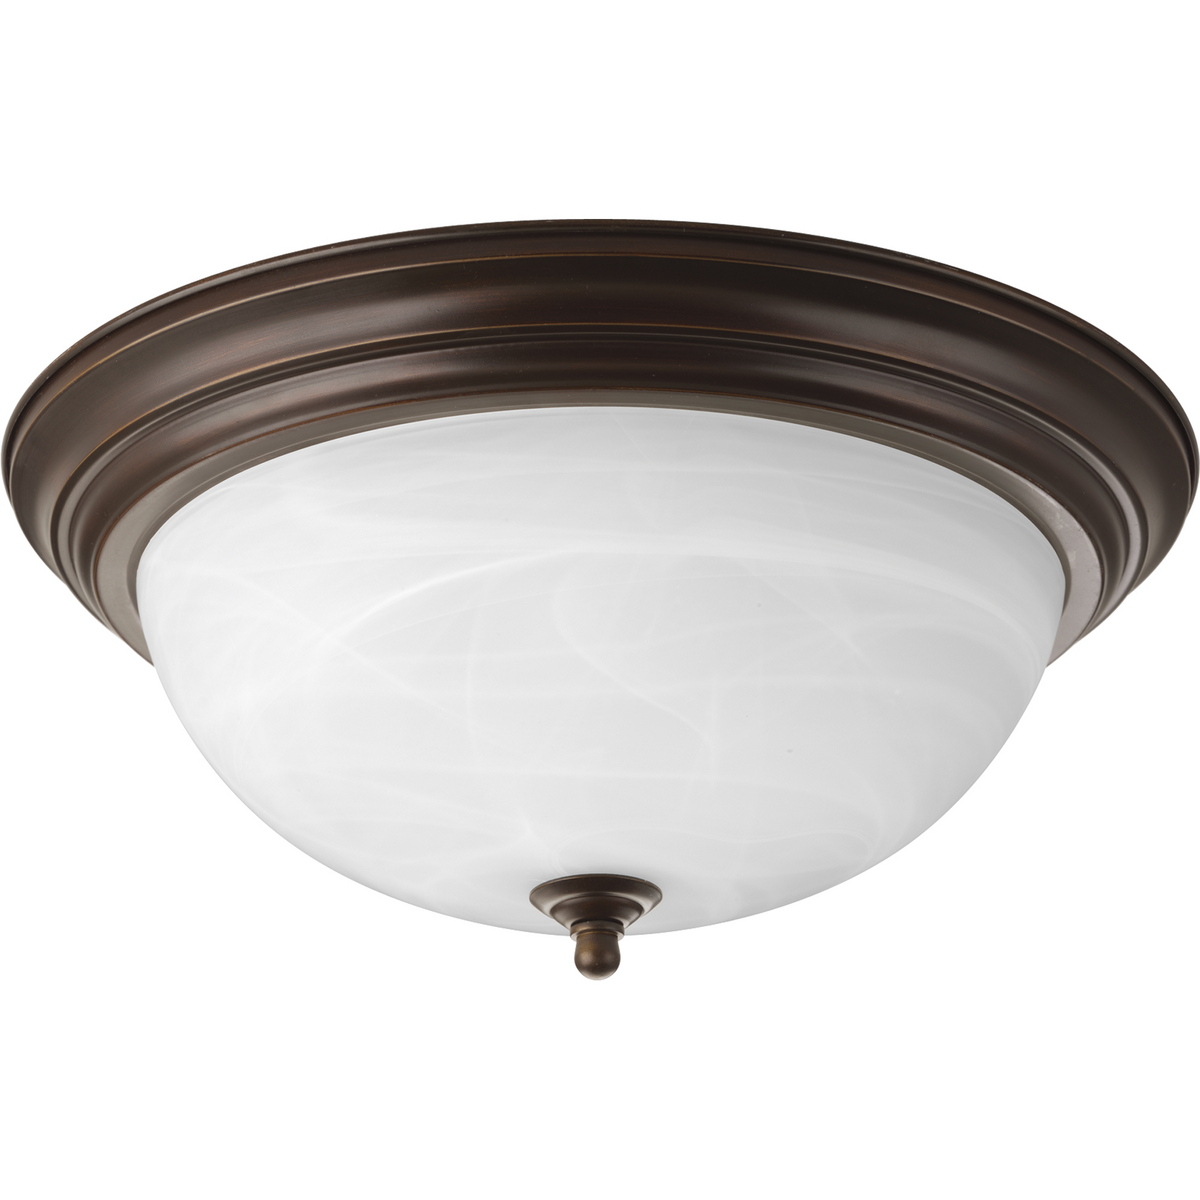 Three-light flush mount with dome shaped alabaster glass, solid trim and decorative knobs. Center lock-up with matching finial. Antique Bronze finish.